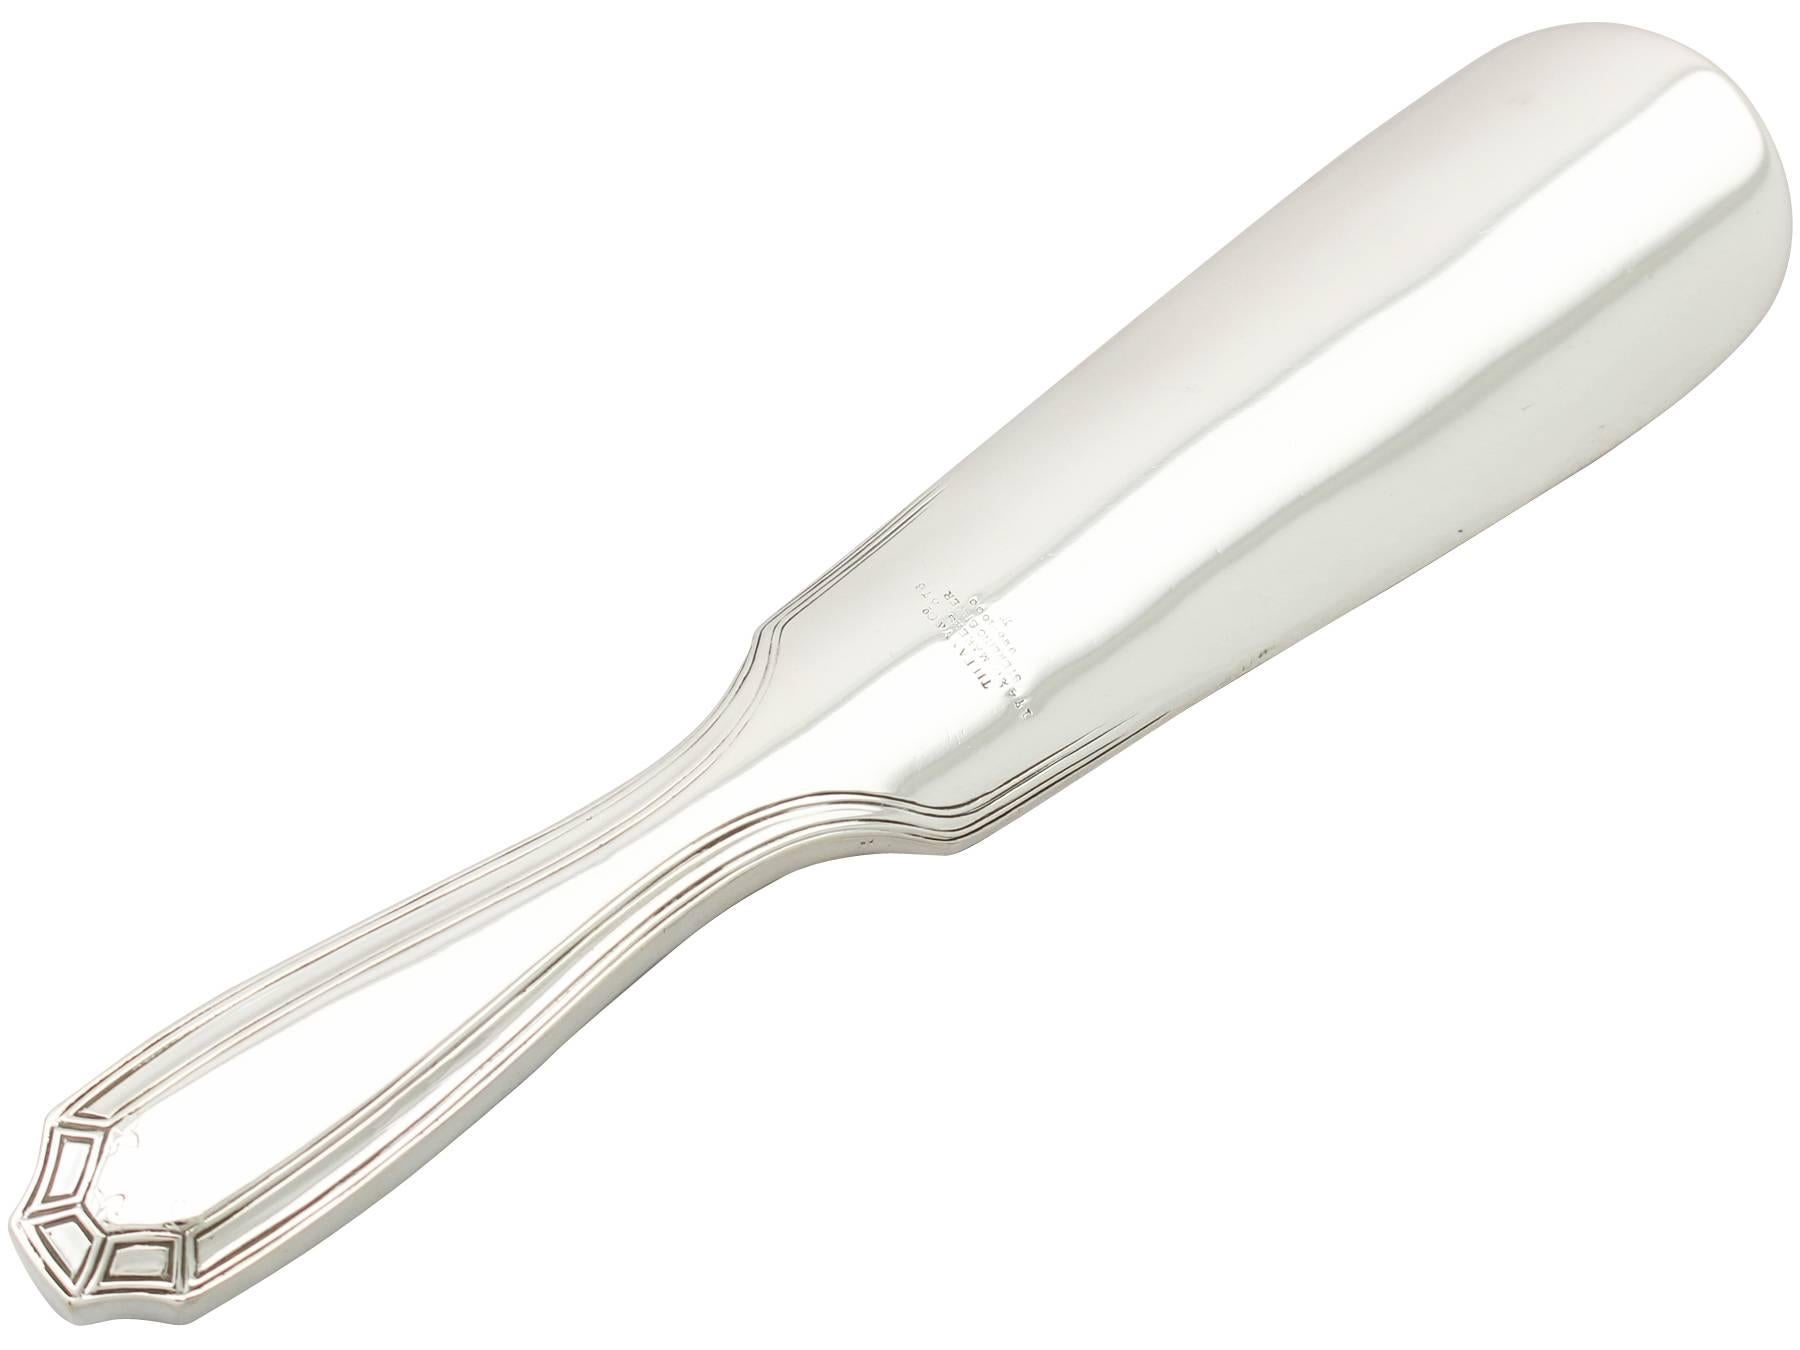 An exceptional, fine and impressive antique American sterling silver shoe horn made by Tiffany & Co in the Art Deco style; an addition to our diverse silverware collection.

This exceptional antique American sterling silver shoe horn has a